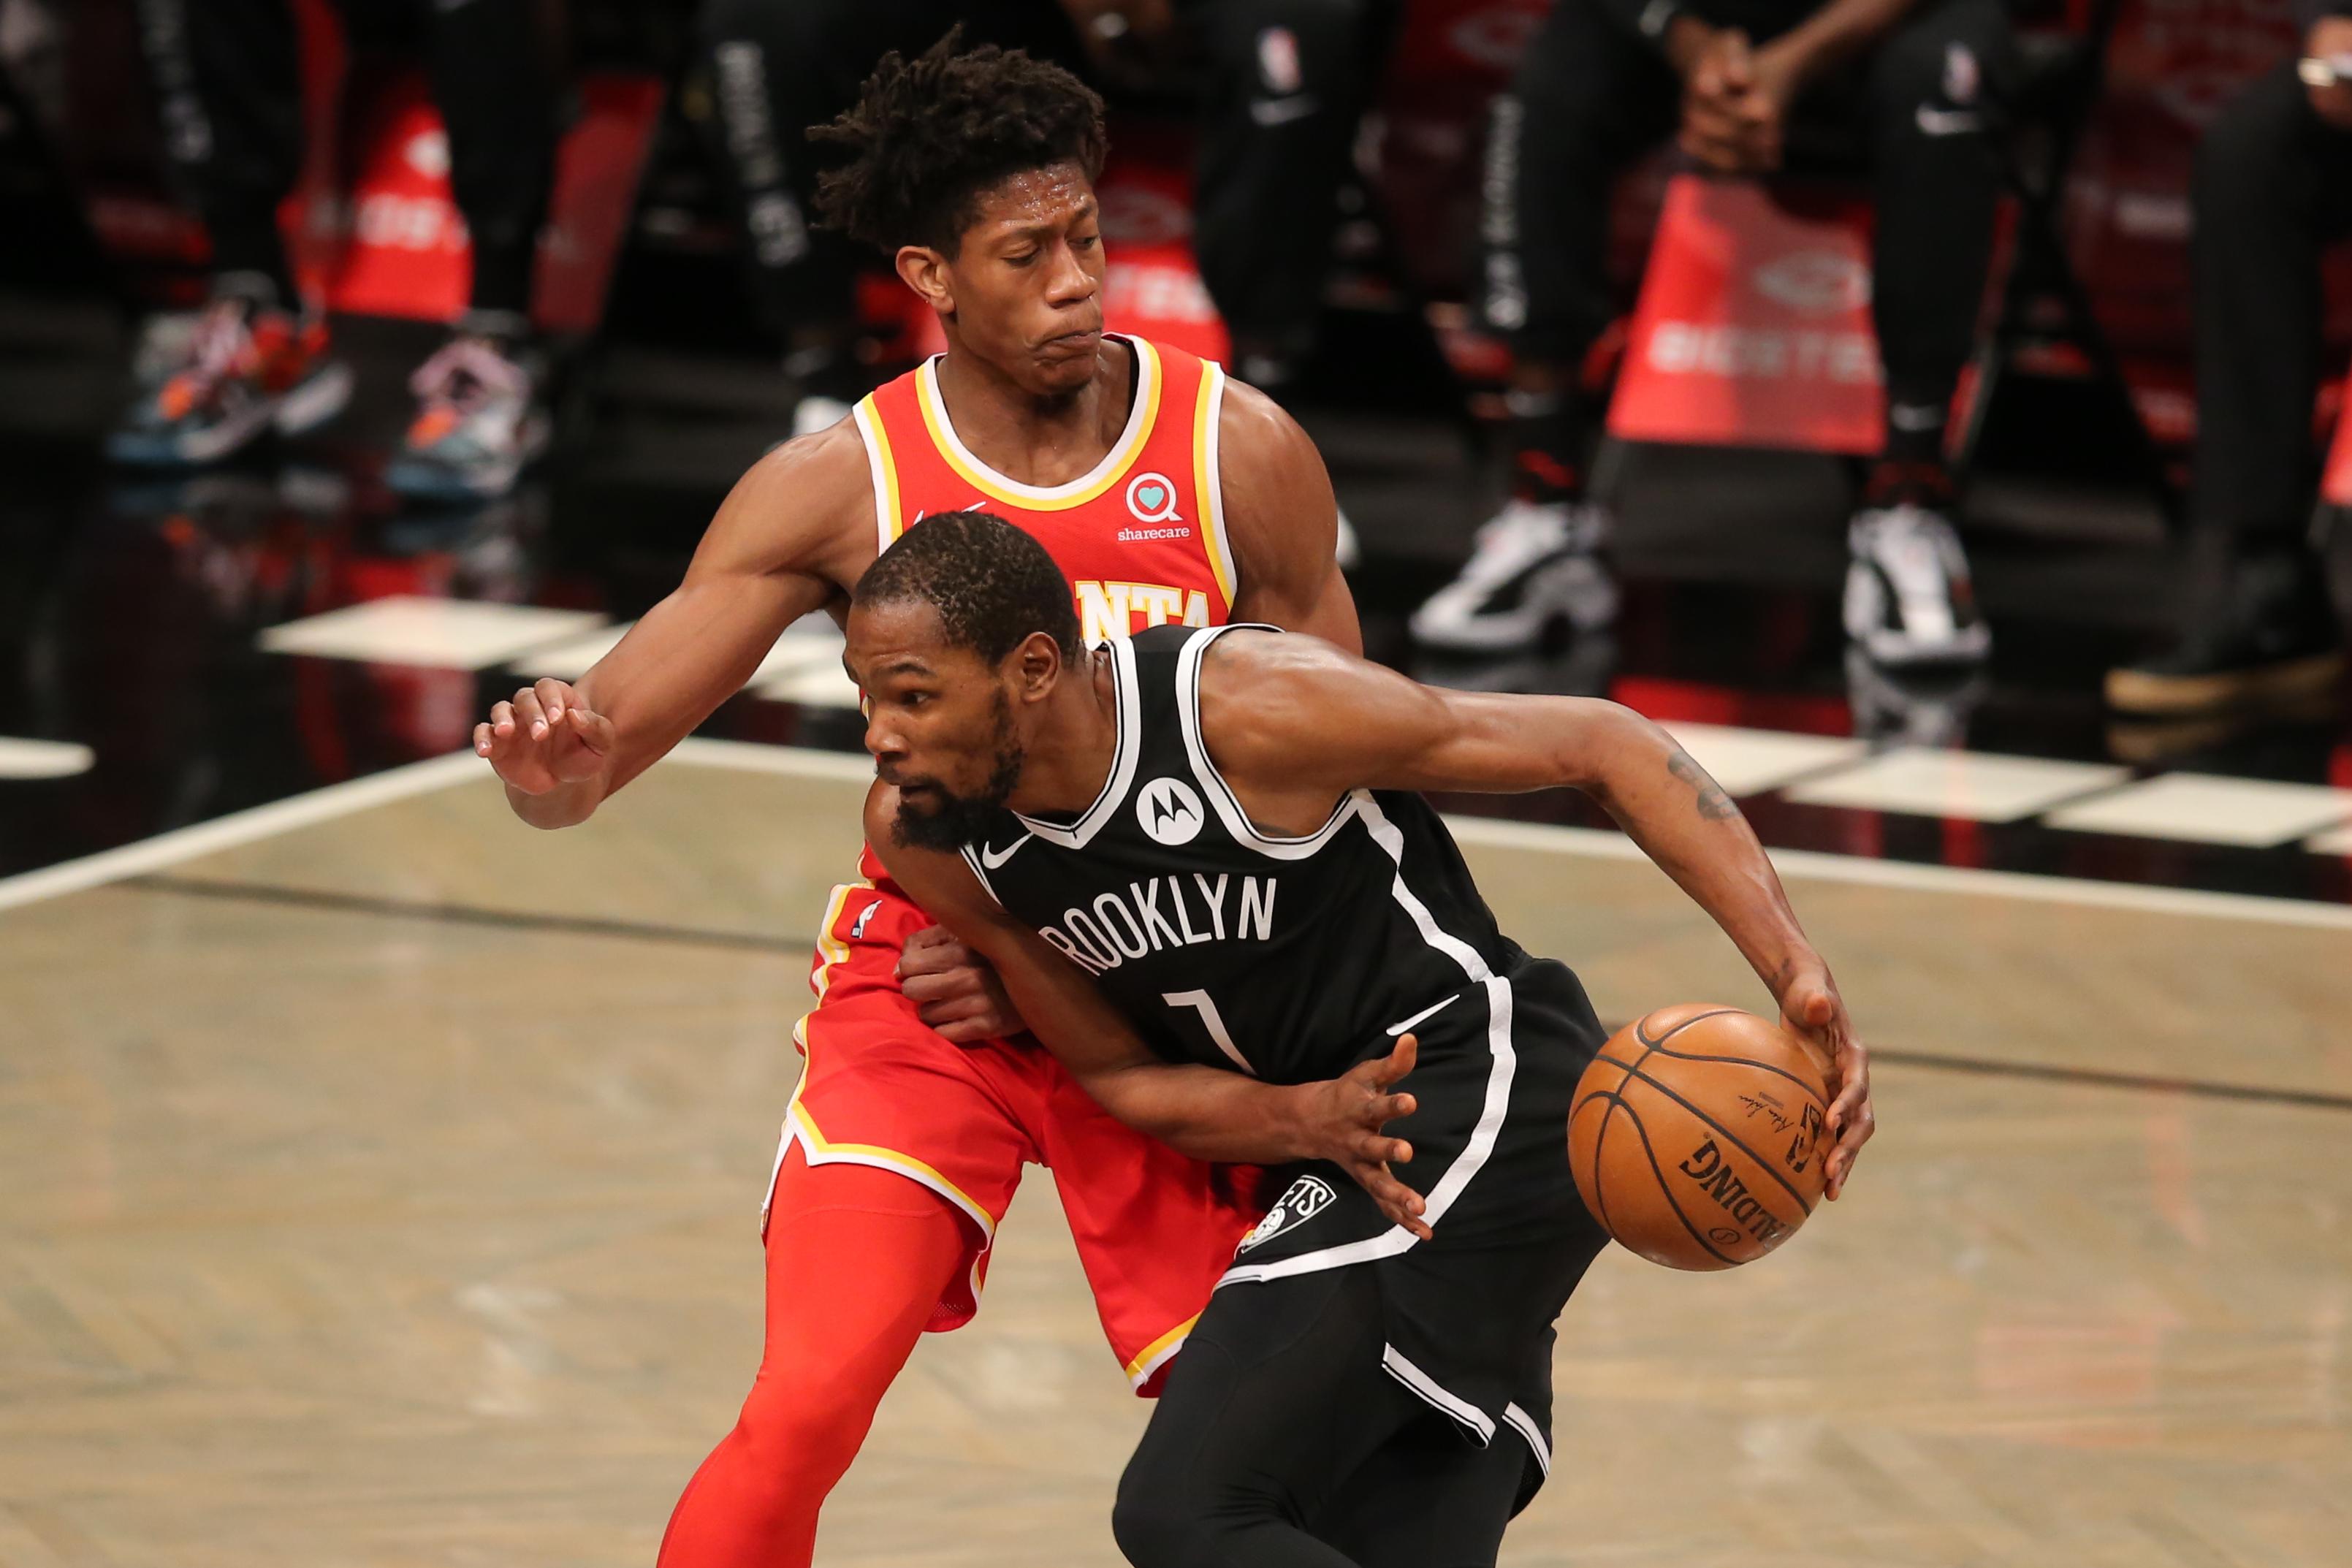 Jan 1, 2021; Brooklyn, New York, USA; Brooklyn Nets small forward Kevin Durant (7) drives to the basket against Atlanta Hawks small forward De'Andre Hunter (back) during the first quarter at Barclays Center. Mandatory Credit: Brad Penner-USA TODAY Sports / © Brad Penner-USA TODAY Sports